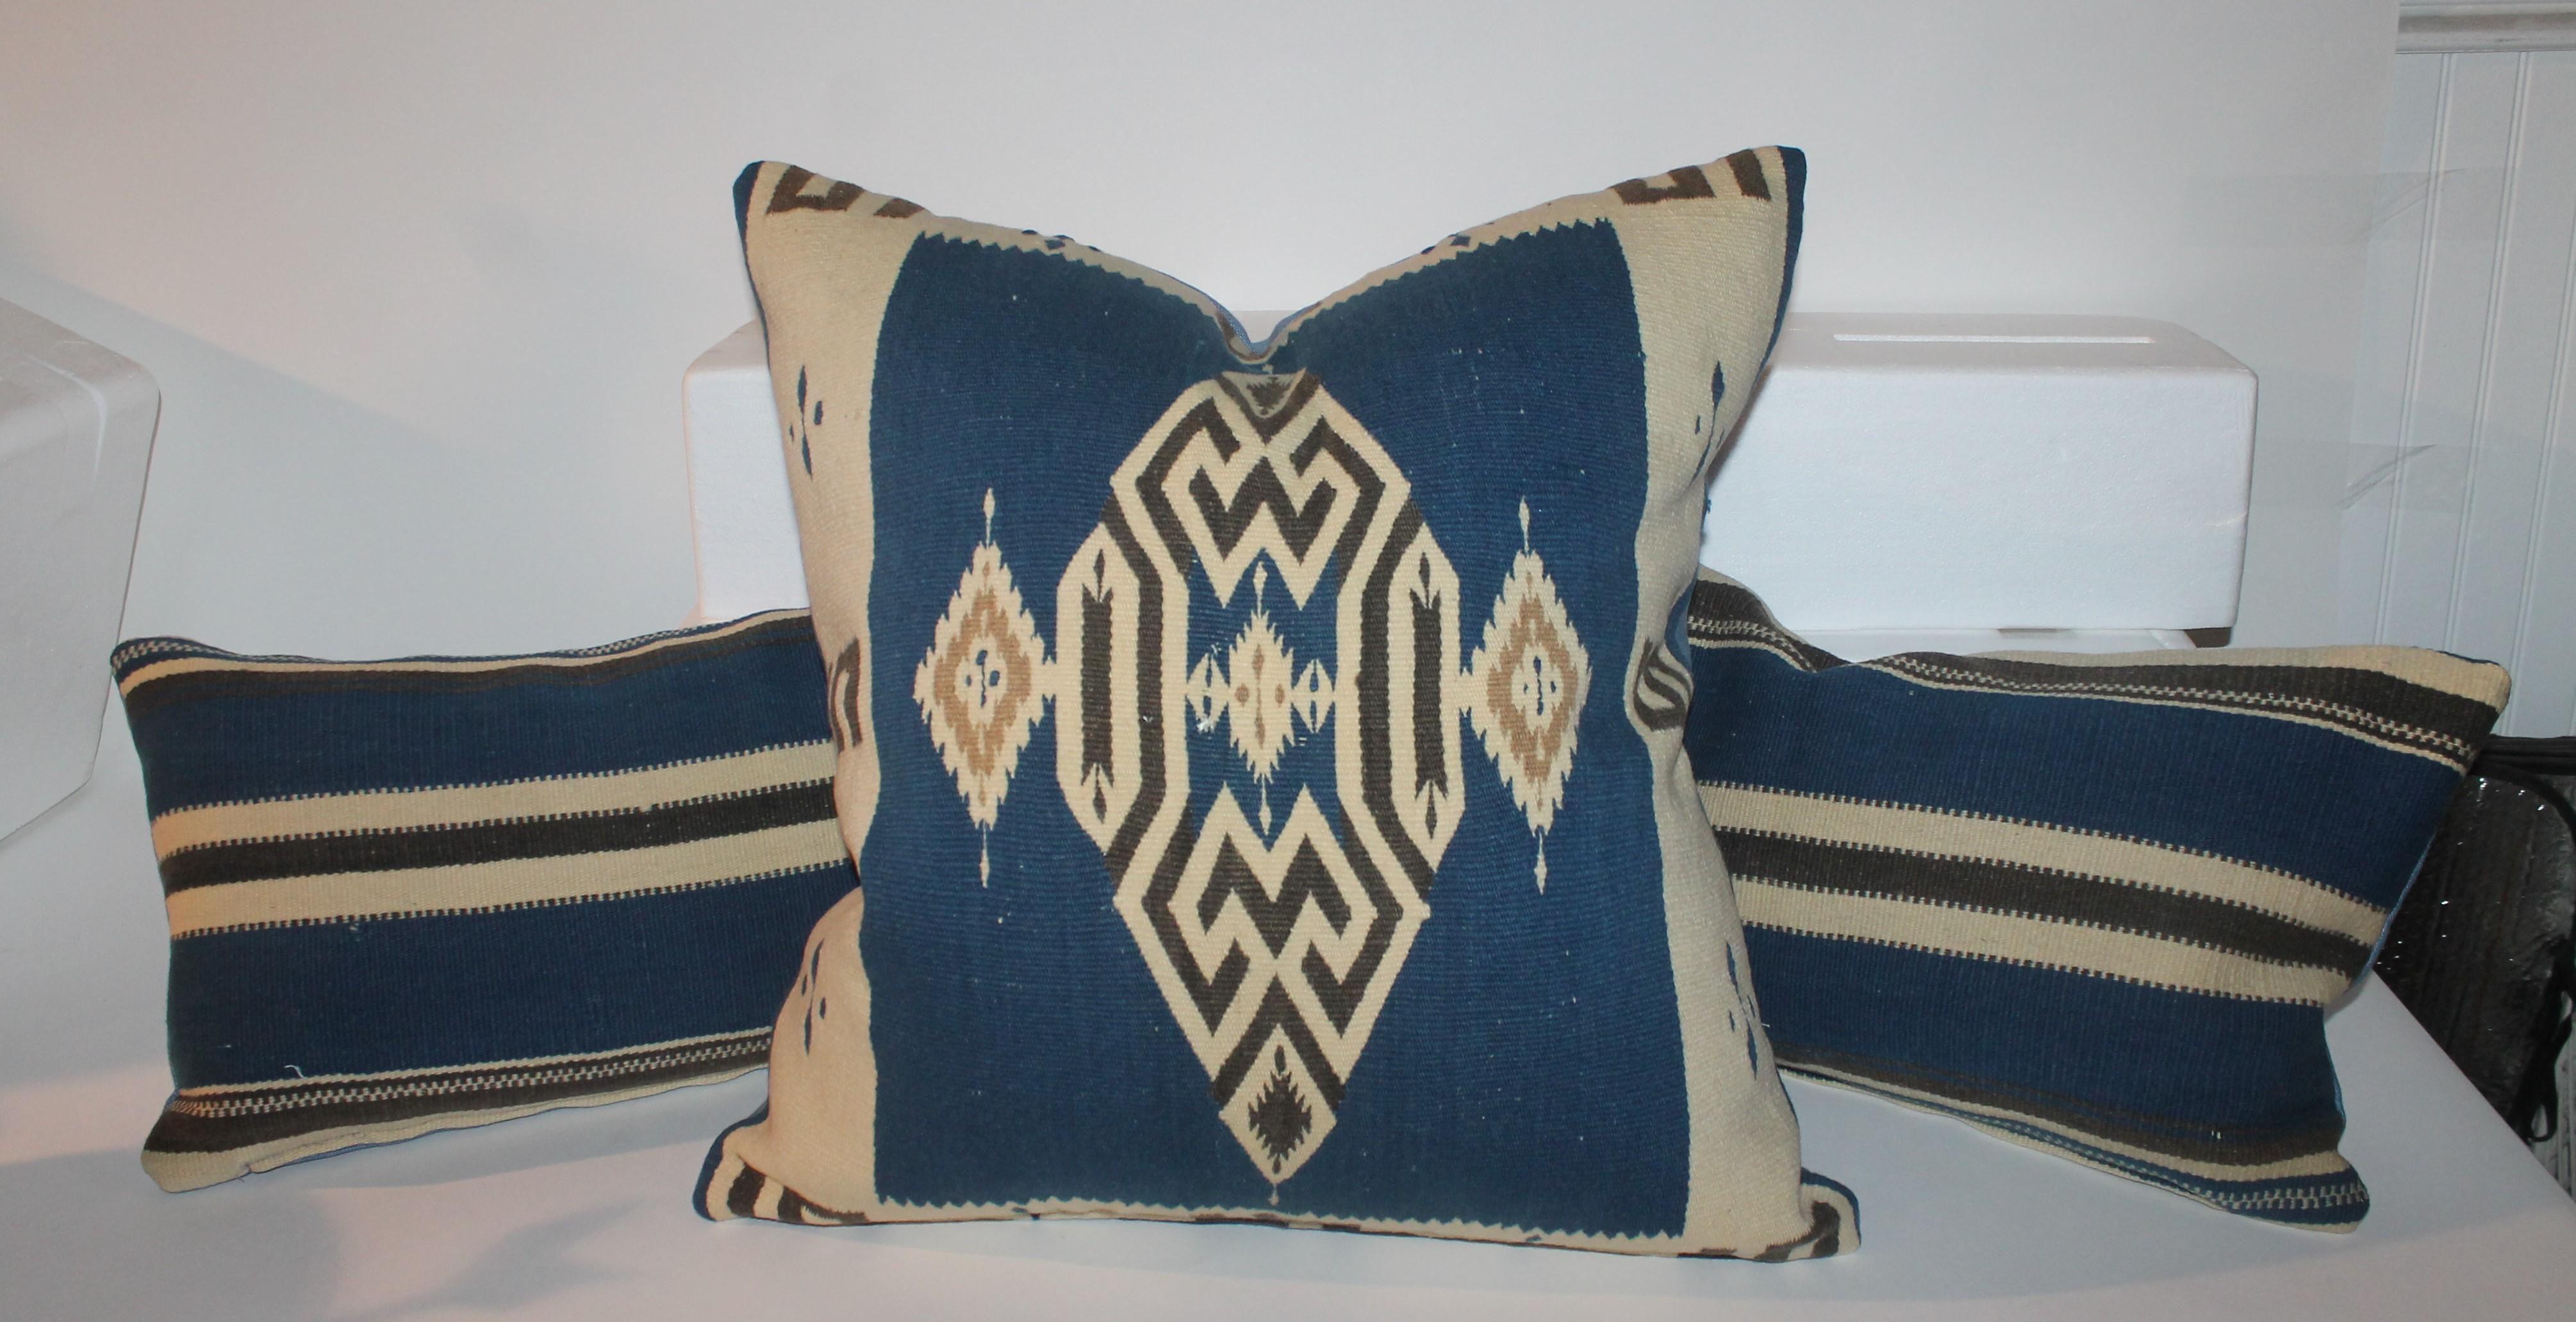 These fine Tex coco Mexican Indian weaving pillows are in fine condition and have cotton linen backings.

Measures: 25 x 12 kidney pillows
23 x 23 large square pillow.